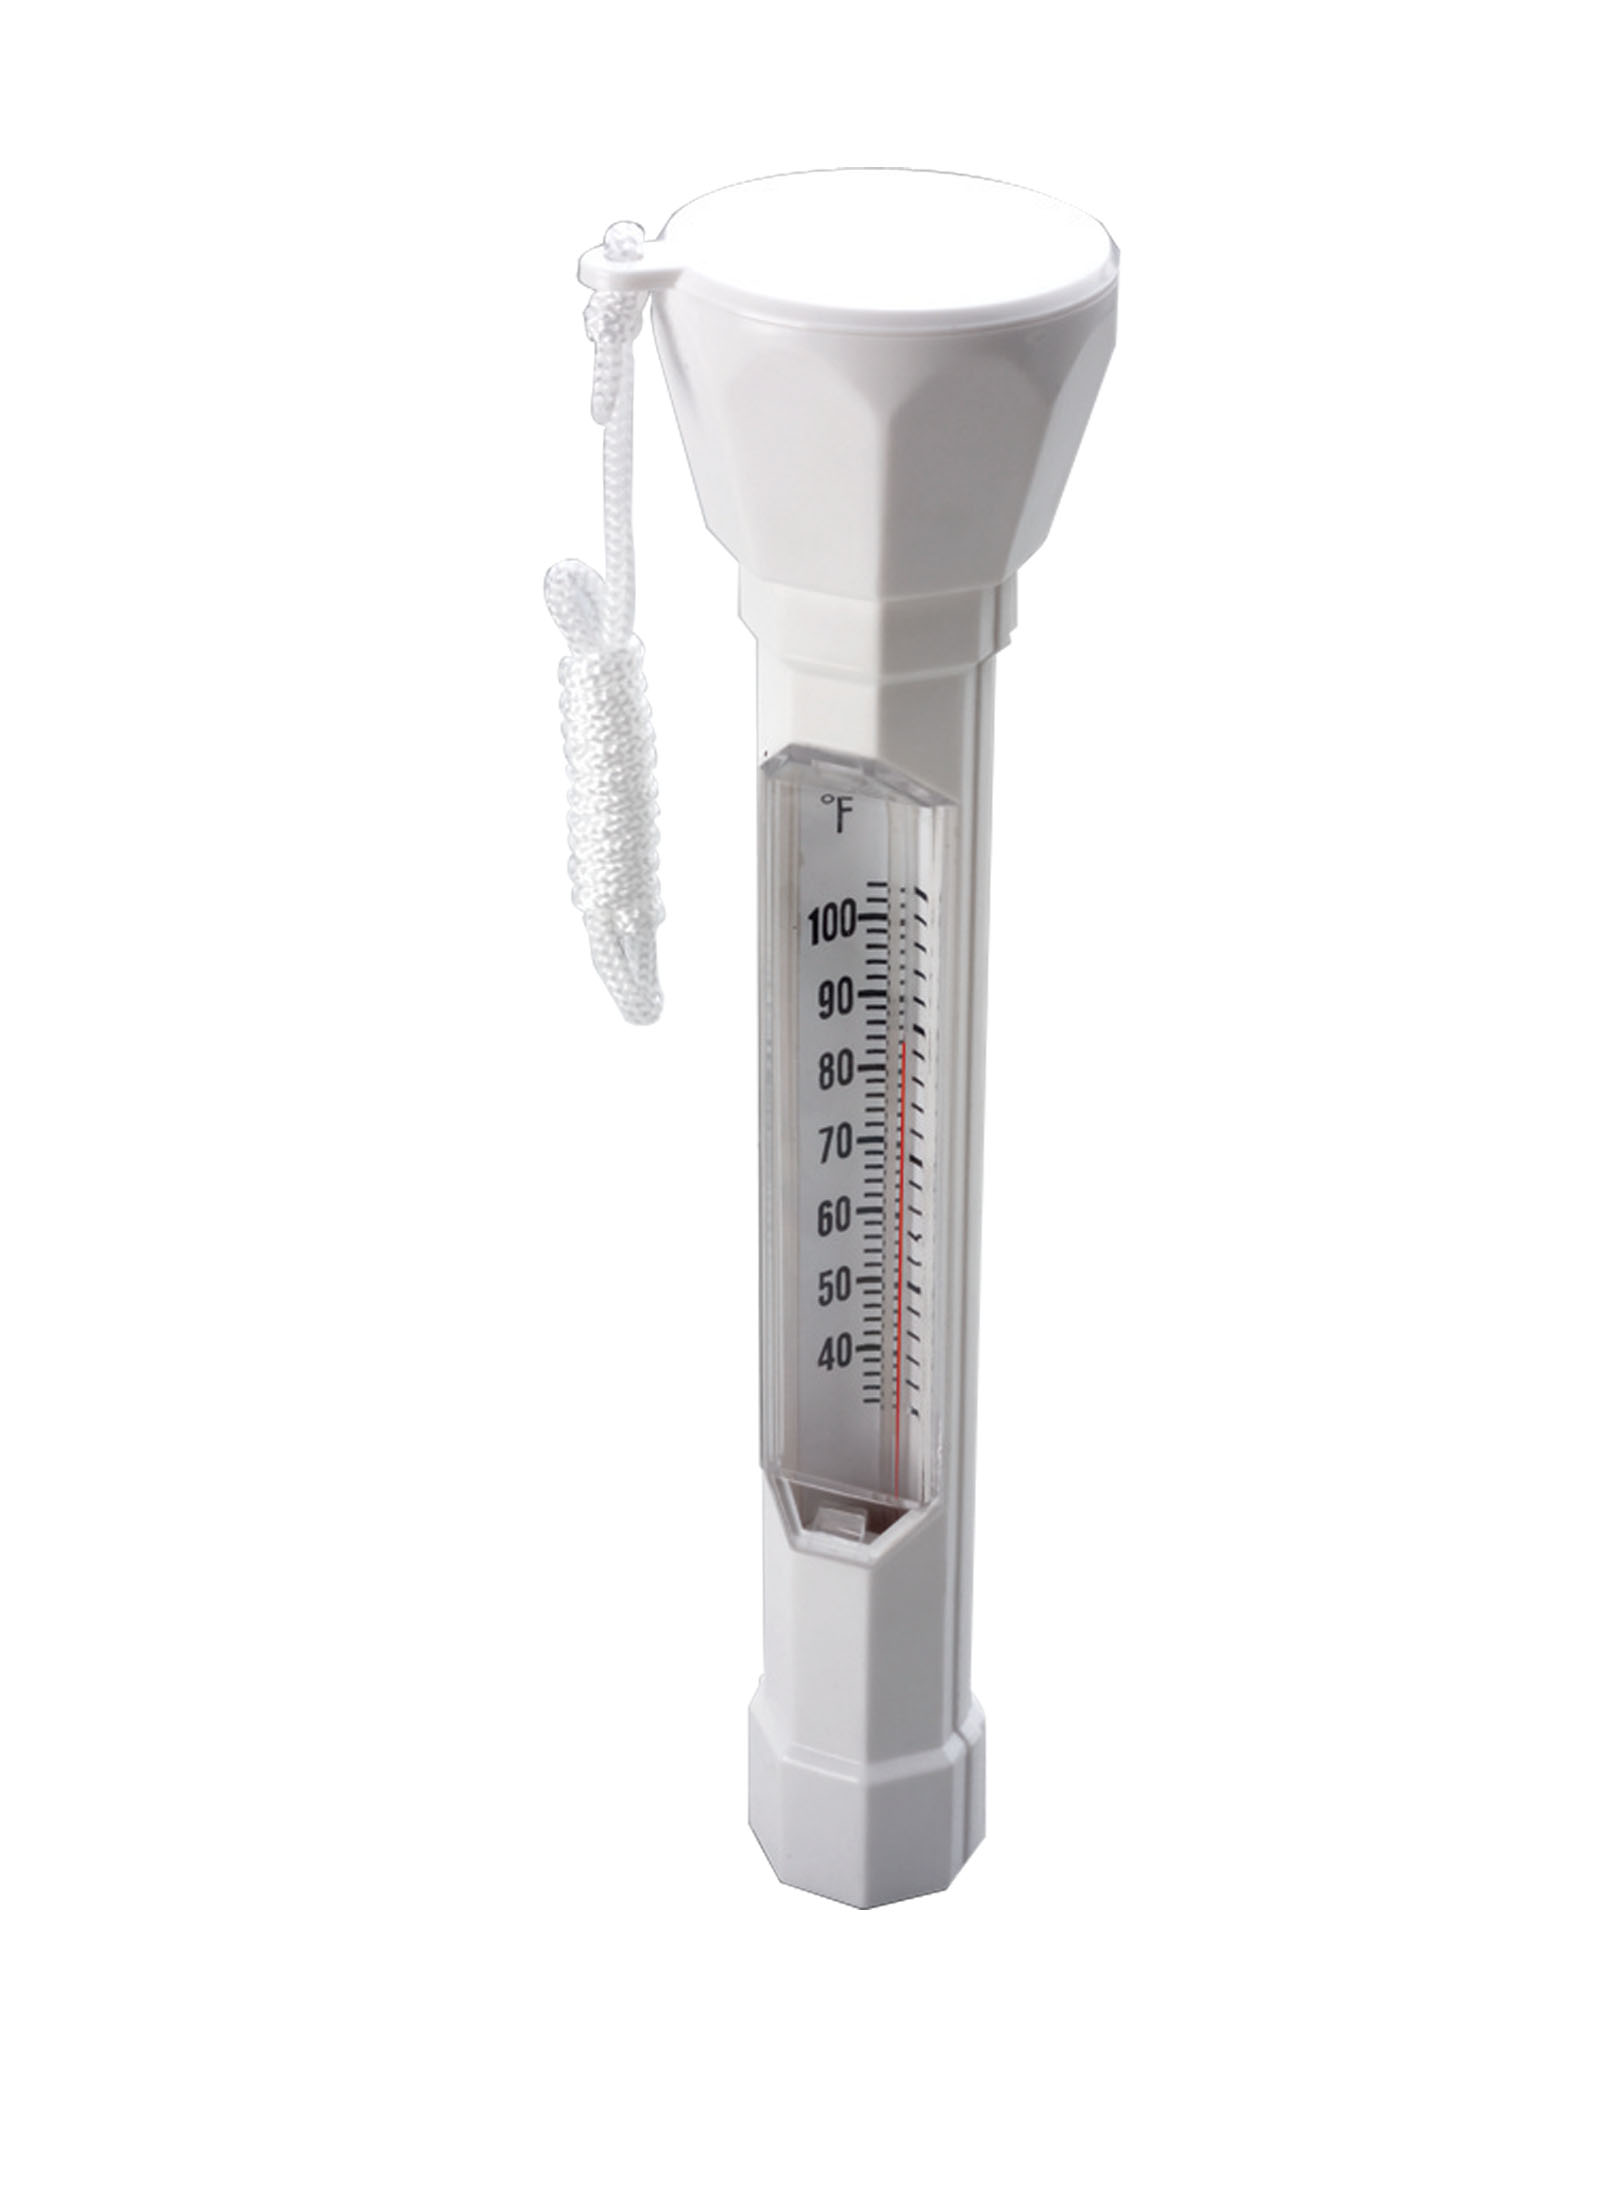 Thermometer Floating - Deluxe 150020E - MAINTENANCE EQUIPMENT